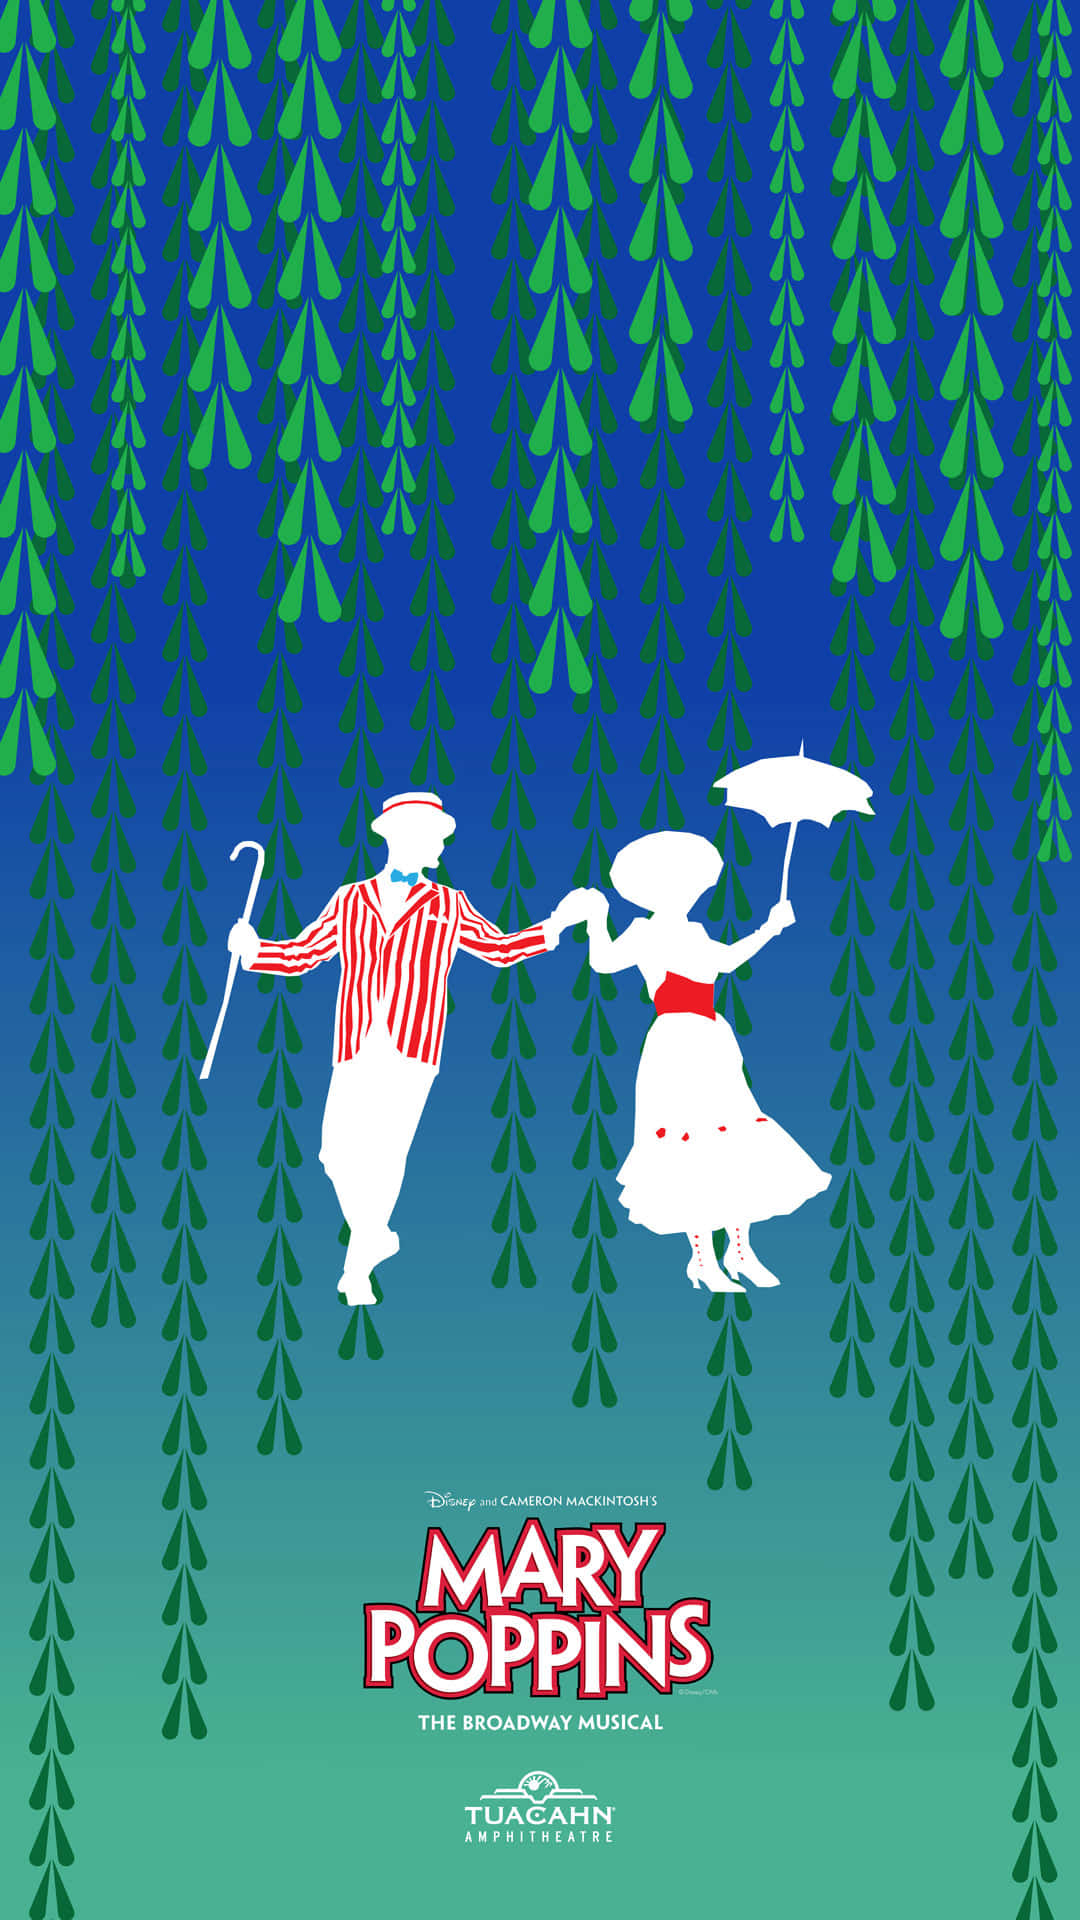 Mary Poppins displayed in a vibrant and colorful image Wallpaper